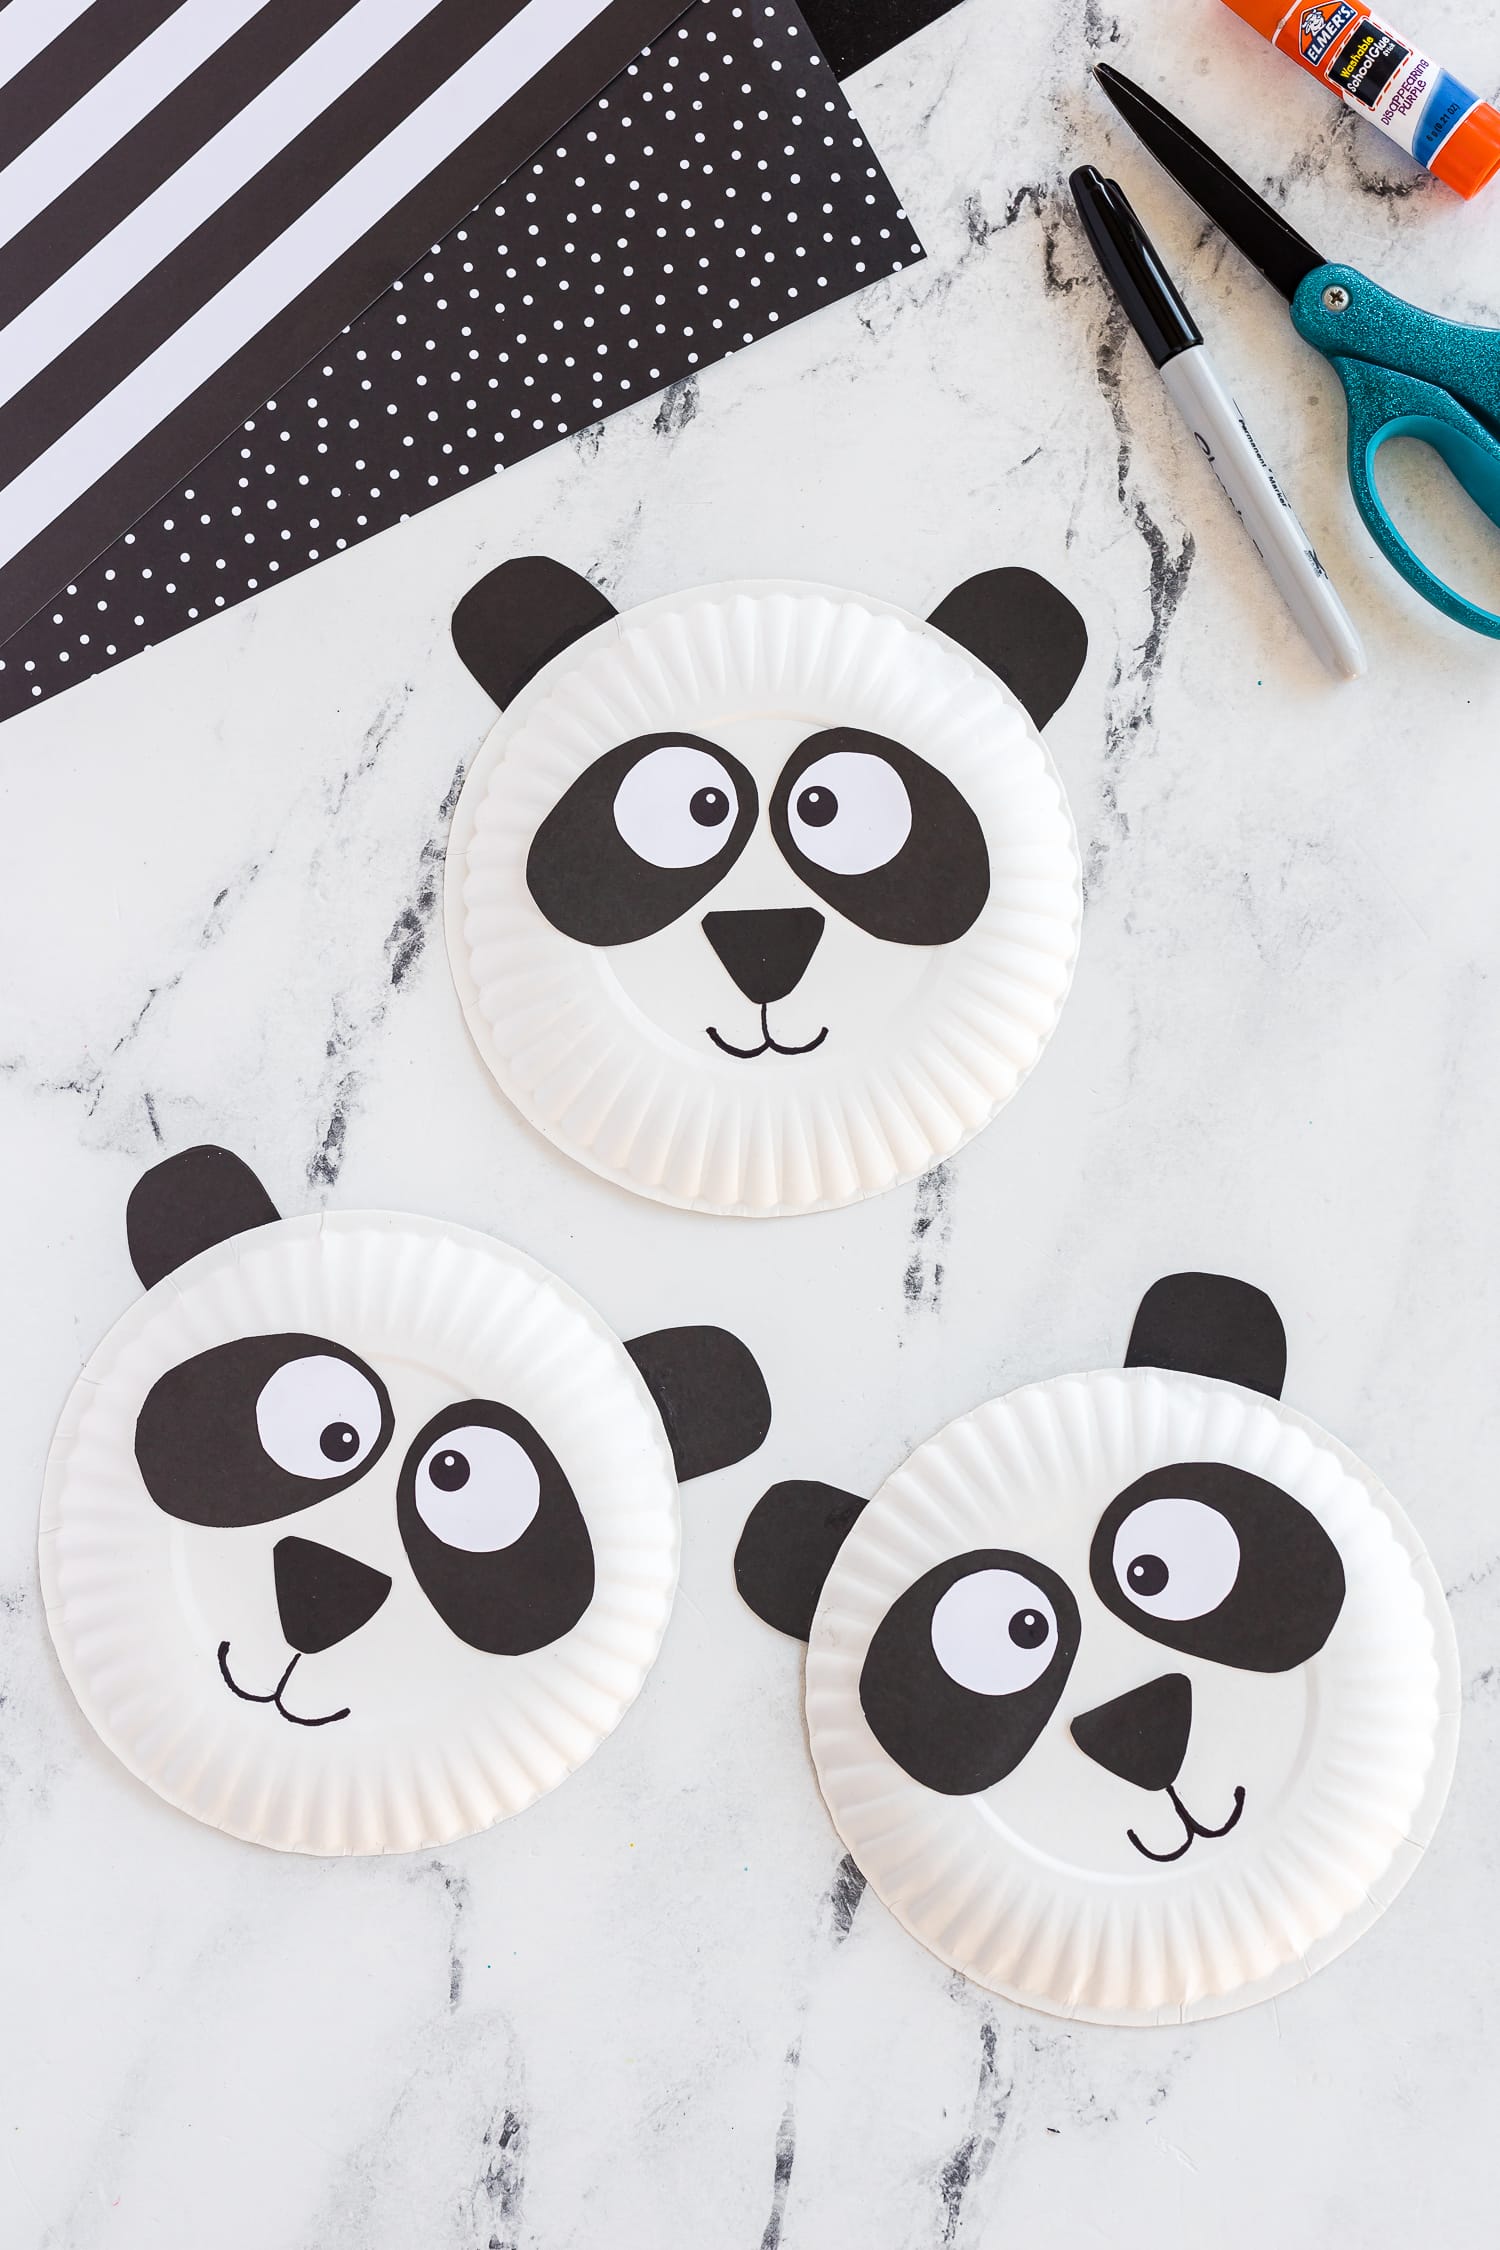 Three paper Plate panda crafts on counter